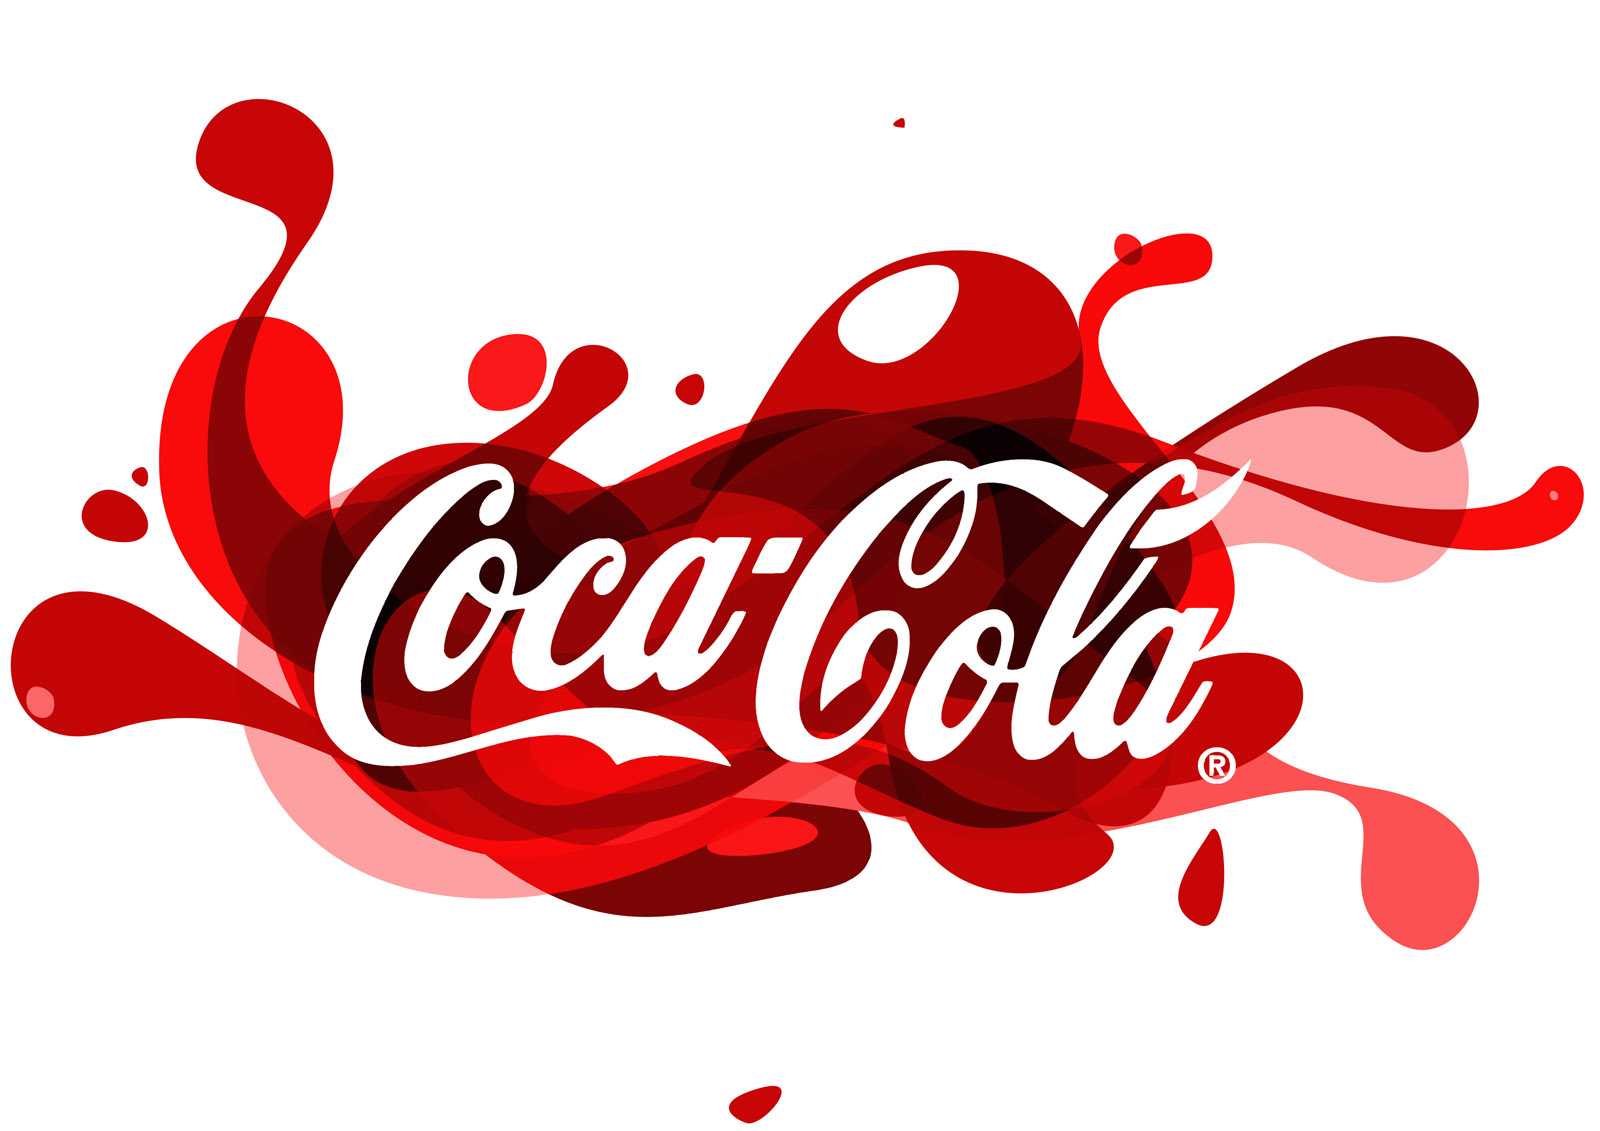 Coca Cola Free Ppt Backgrounds For Your Powerpoint Templates Within Coca Cola Powerpoint Template